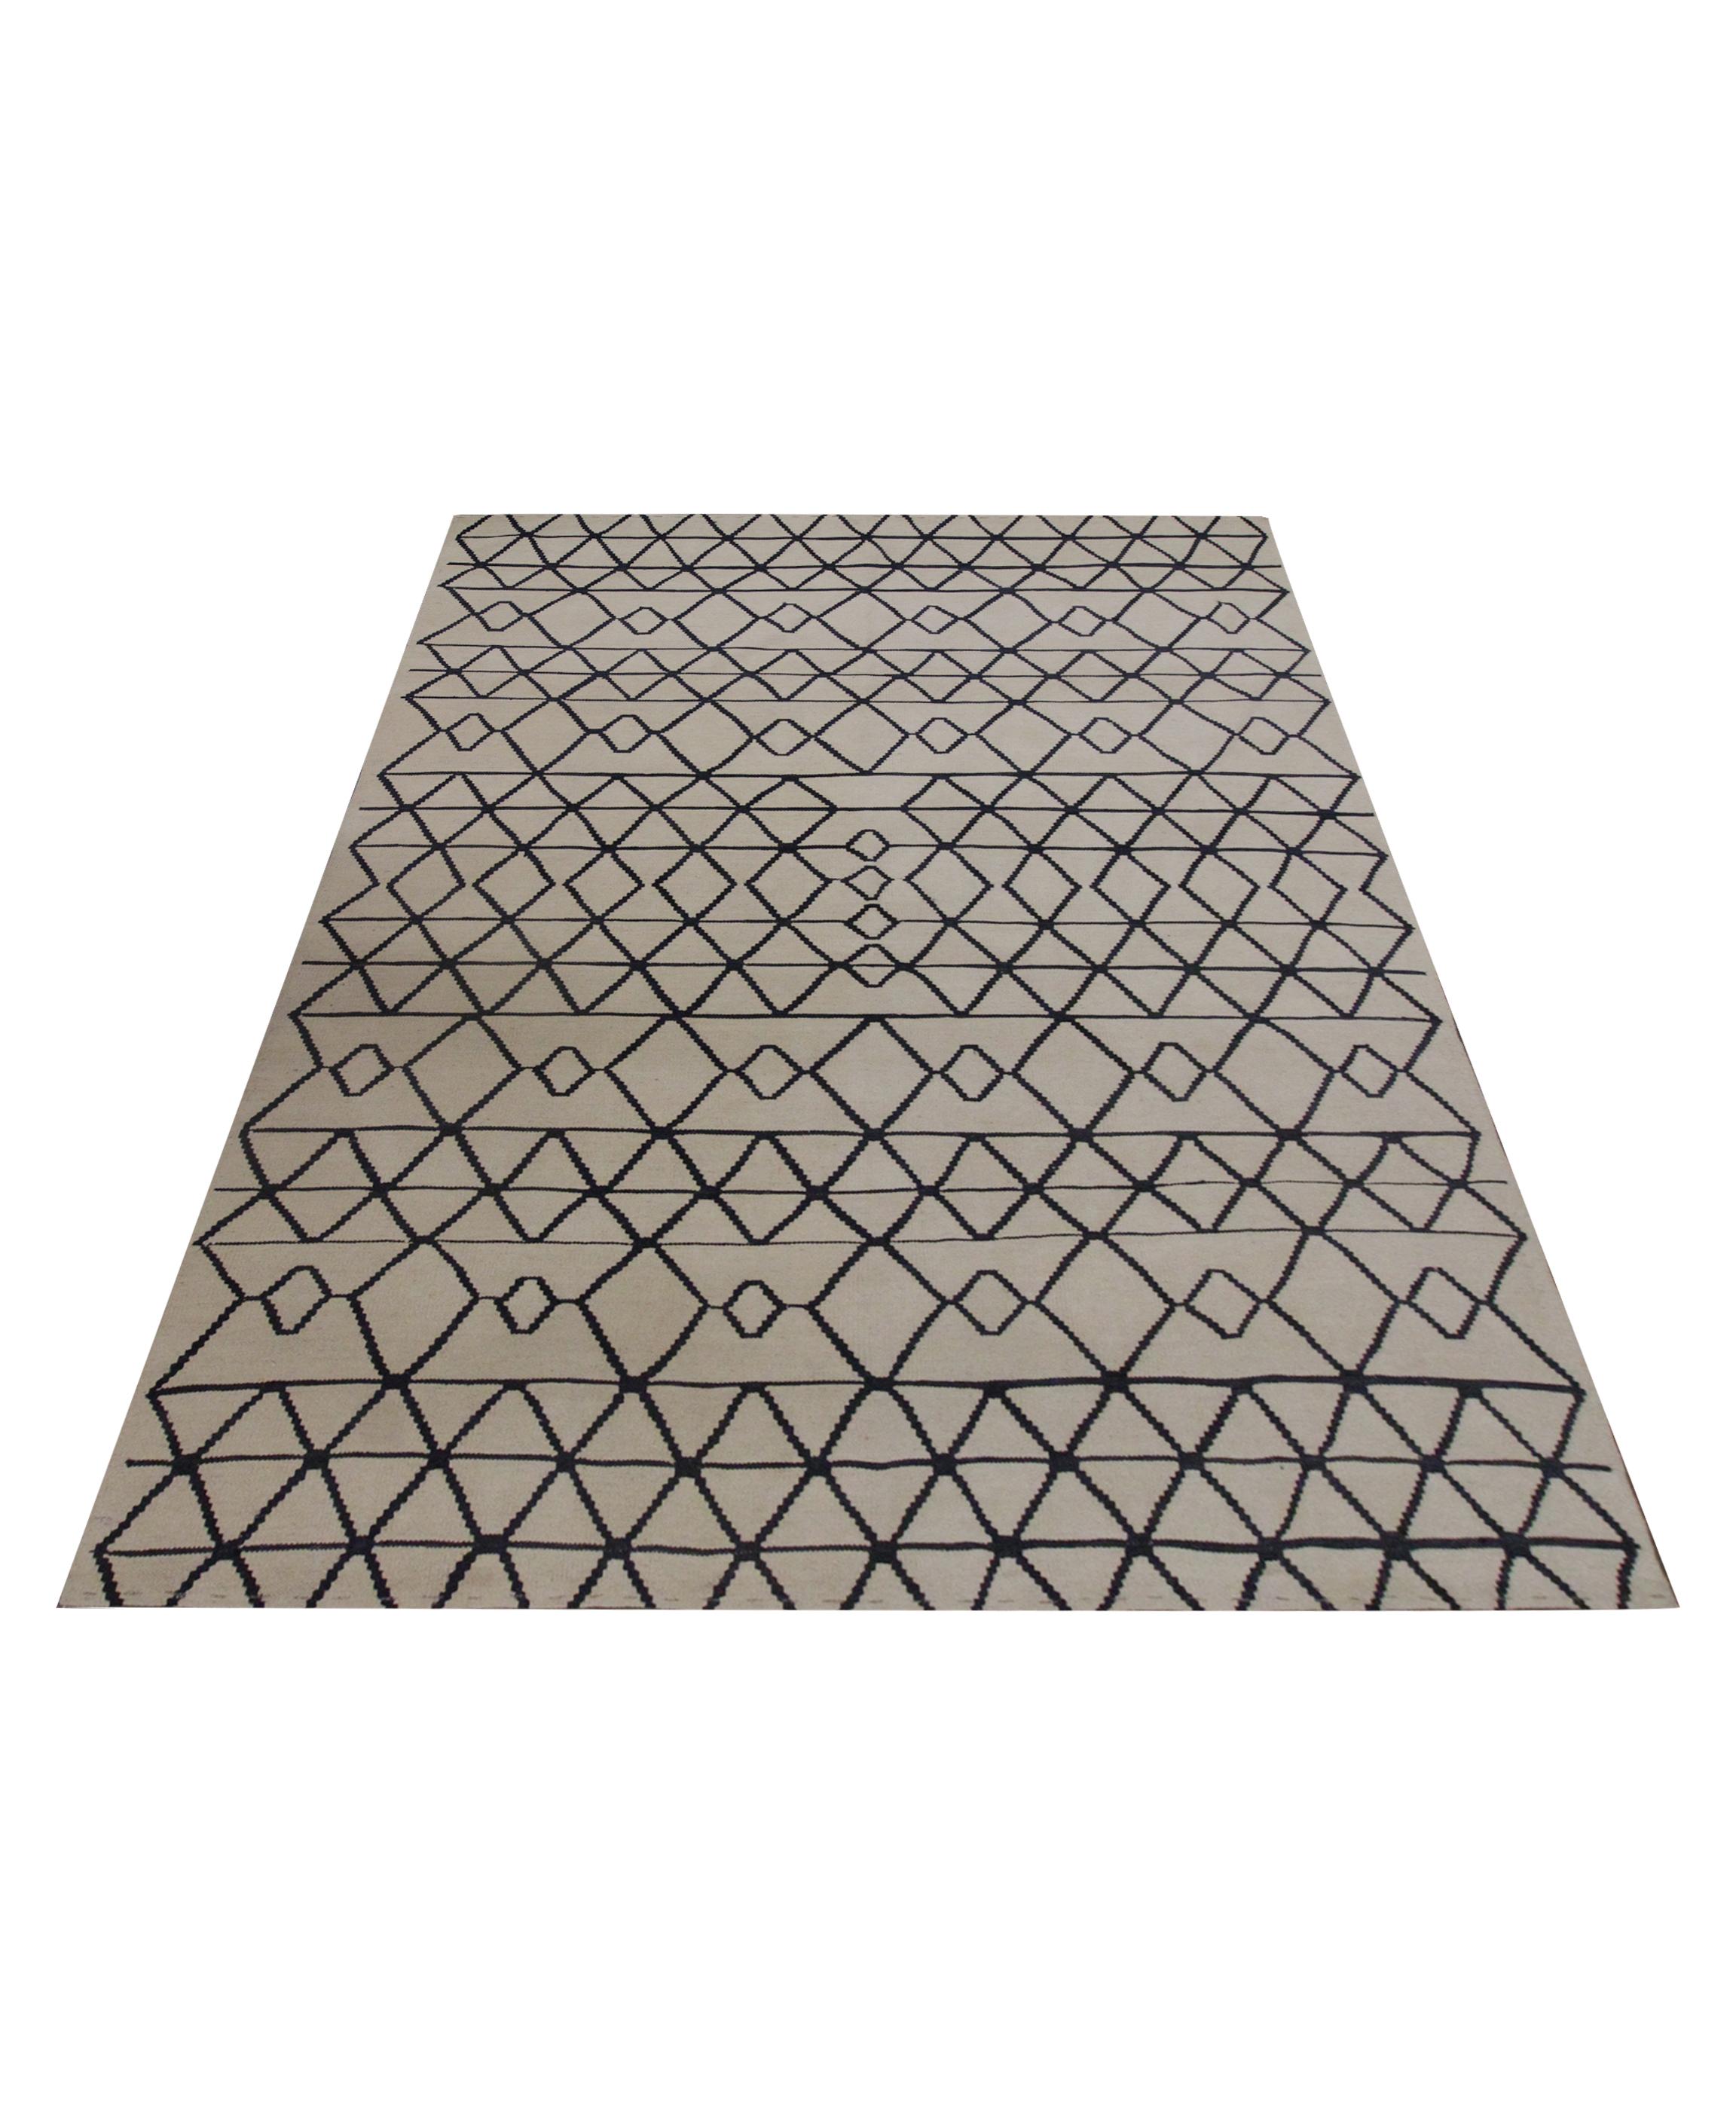 This fine wool Kilim is a New Modern Afghan area rug woven with a simple colour palette of cream and black. The black accents make up the symmetrical geometric pattern, creating a bold eye-catching rug. Similar to Scandinavian design this carpet is